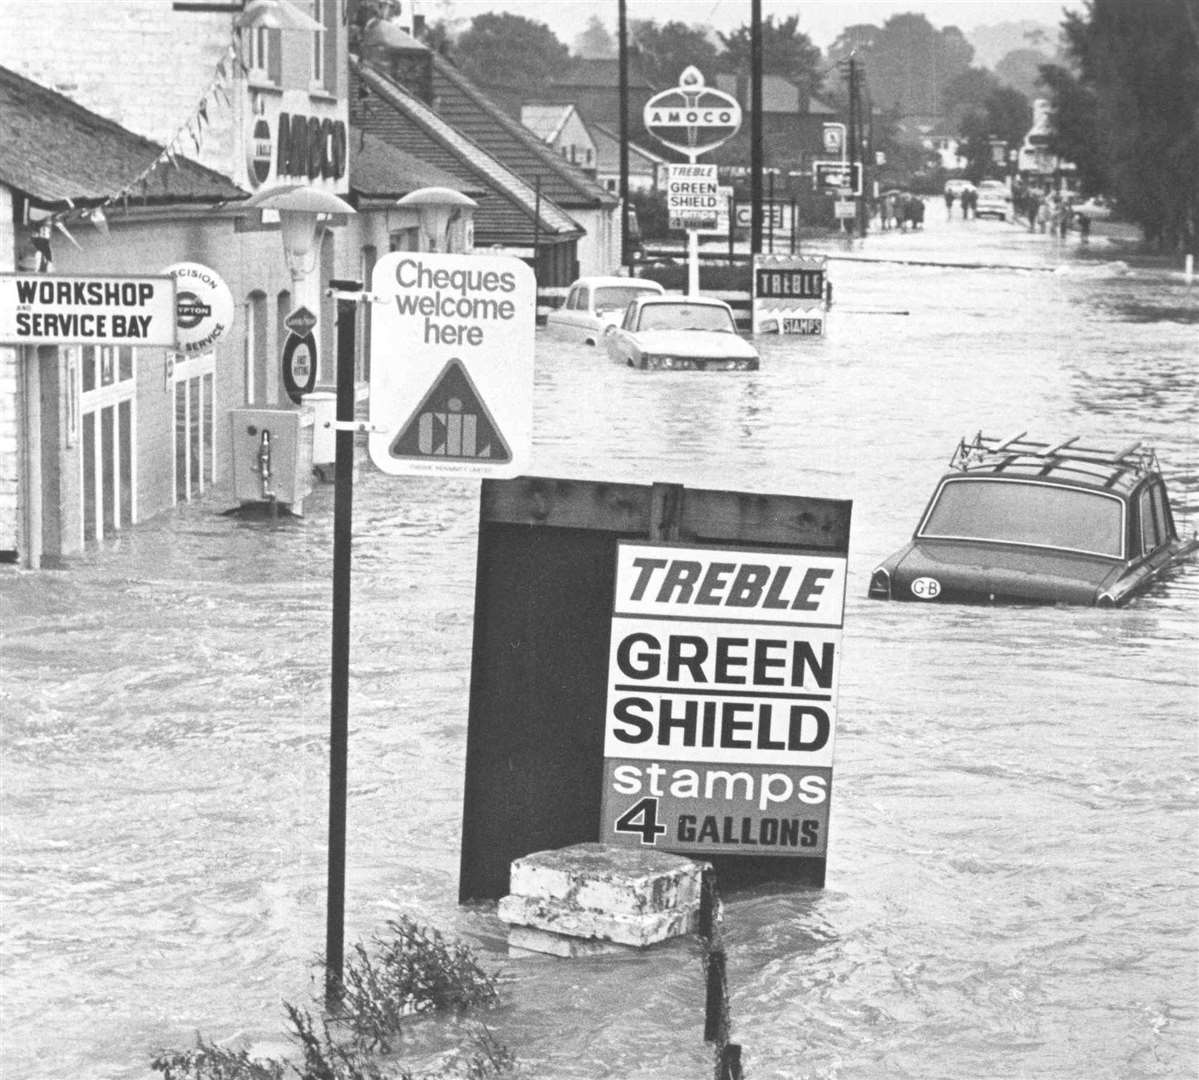 An abandoned car stuck in the flood waters in Tonbridge in 1968